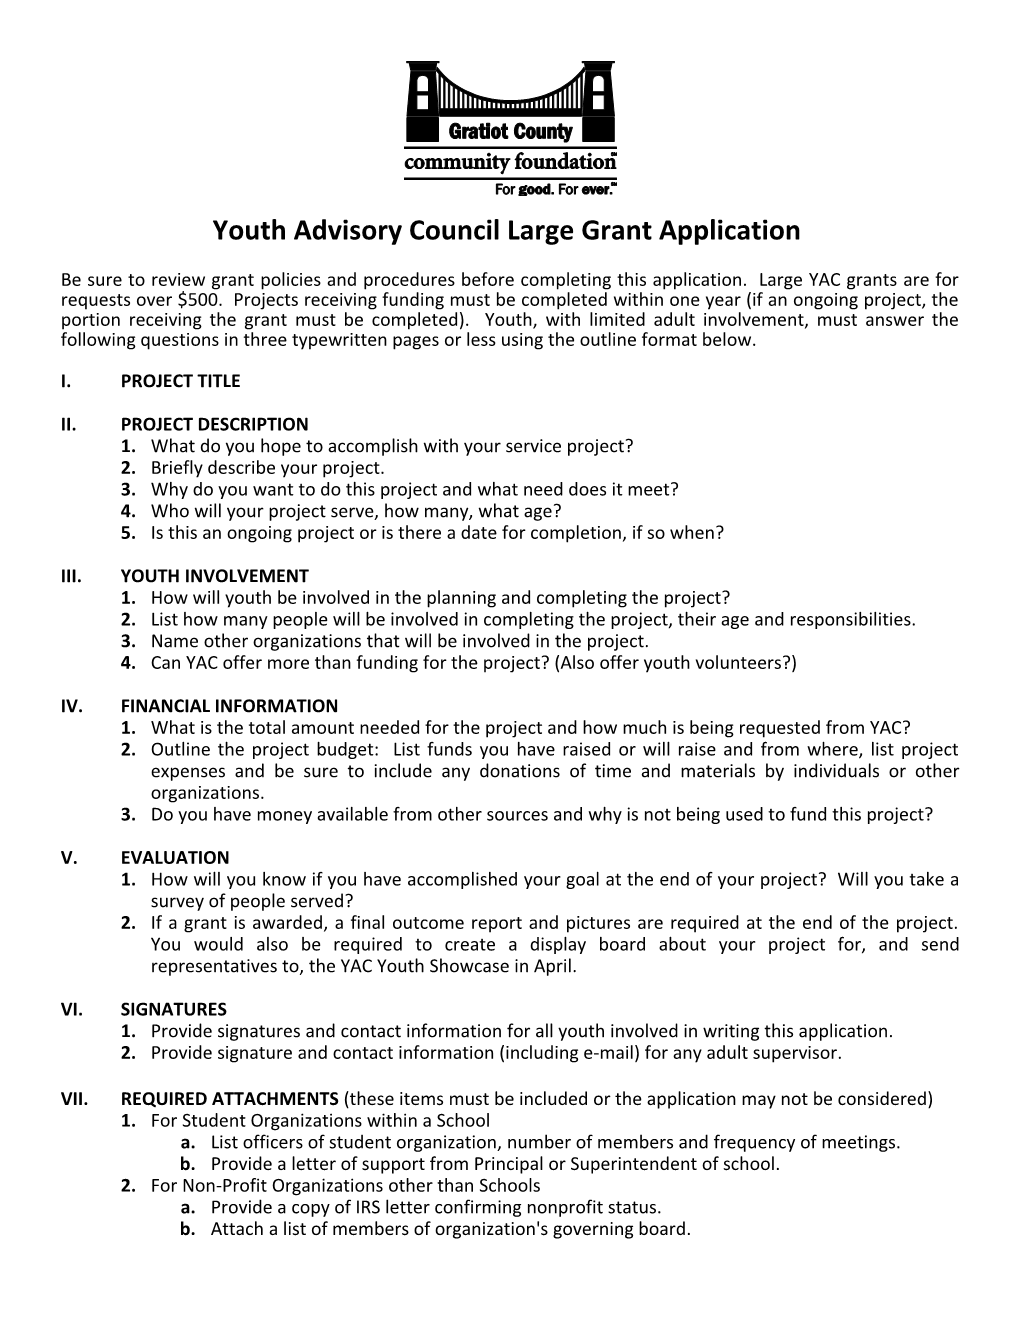 Youth Advisory Council Large Grant Application